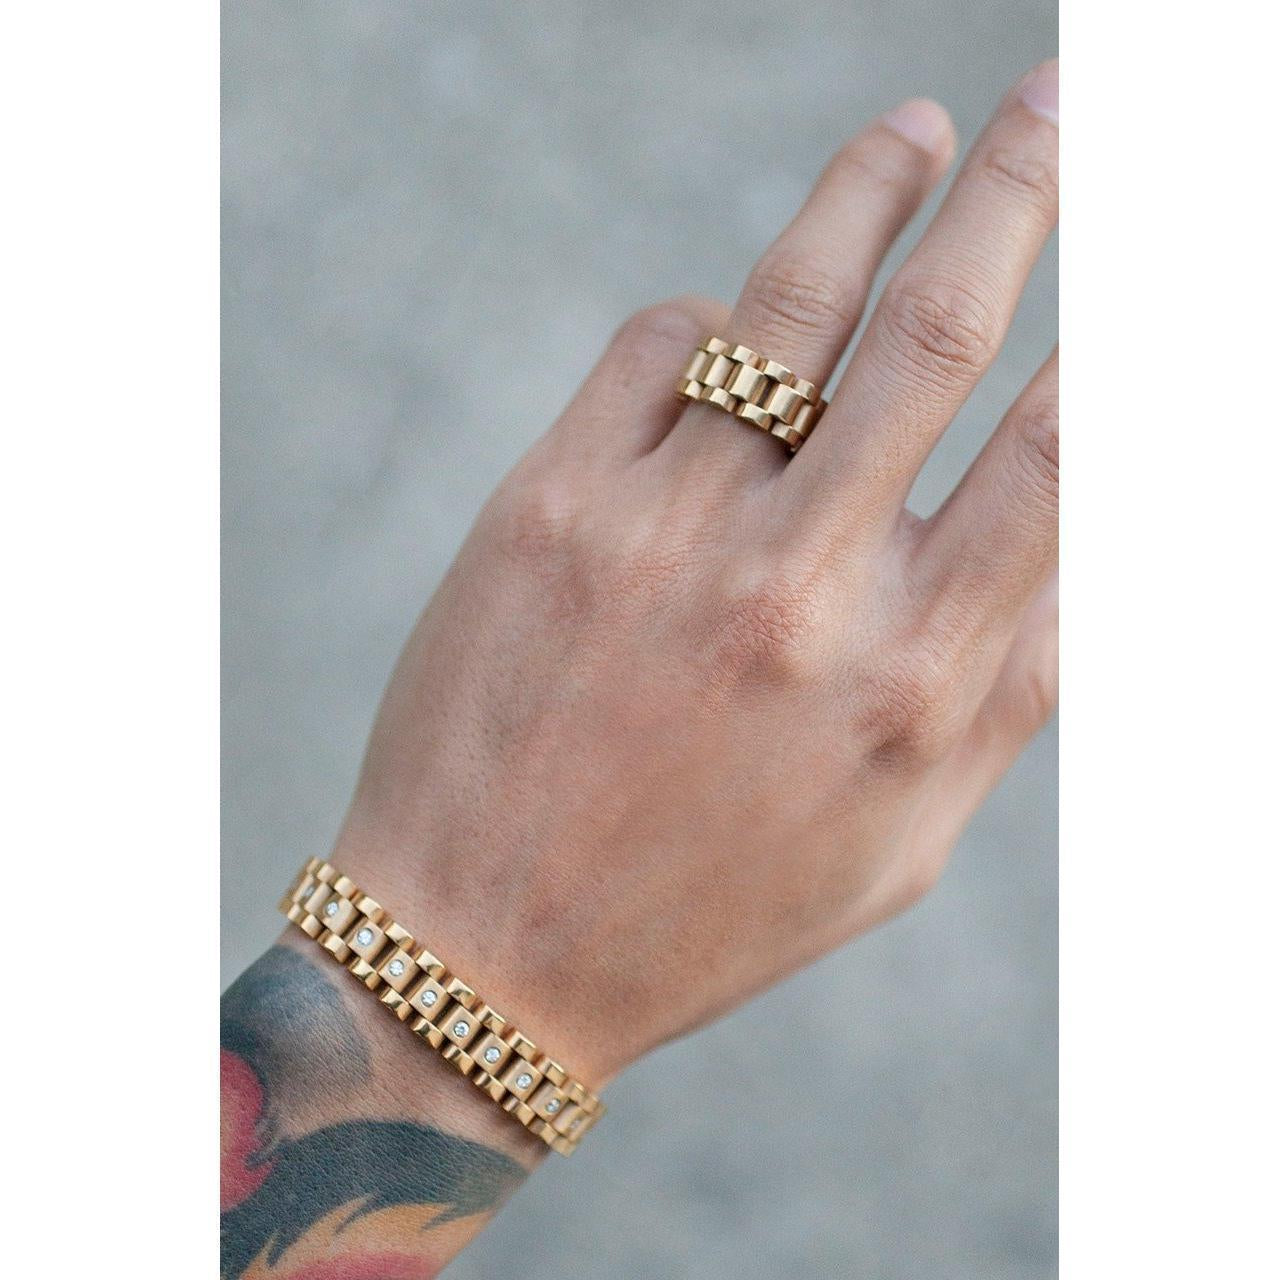 Mister Band Ring - Mister SFC - Fashion Jewelry - Fashion Accessories